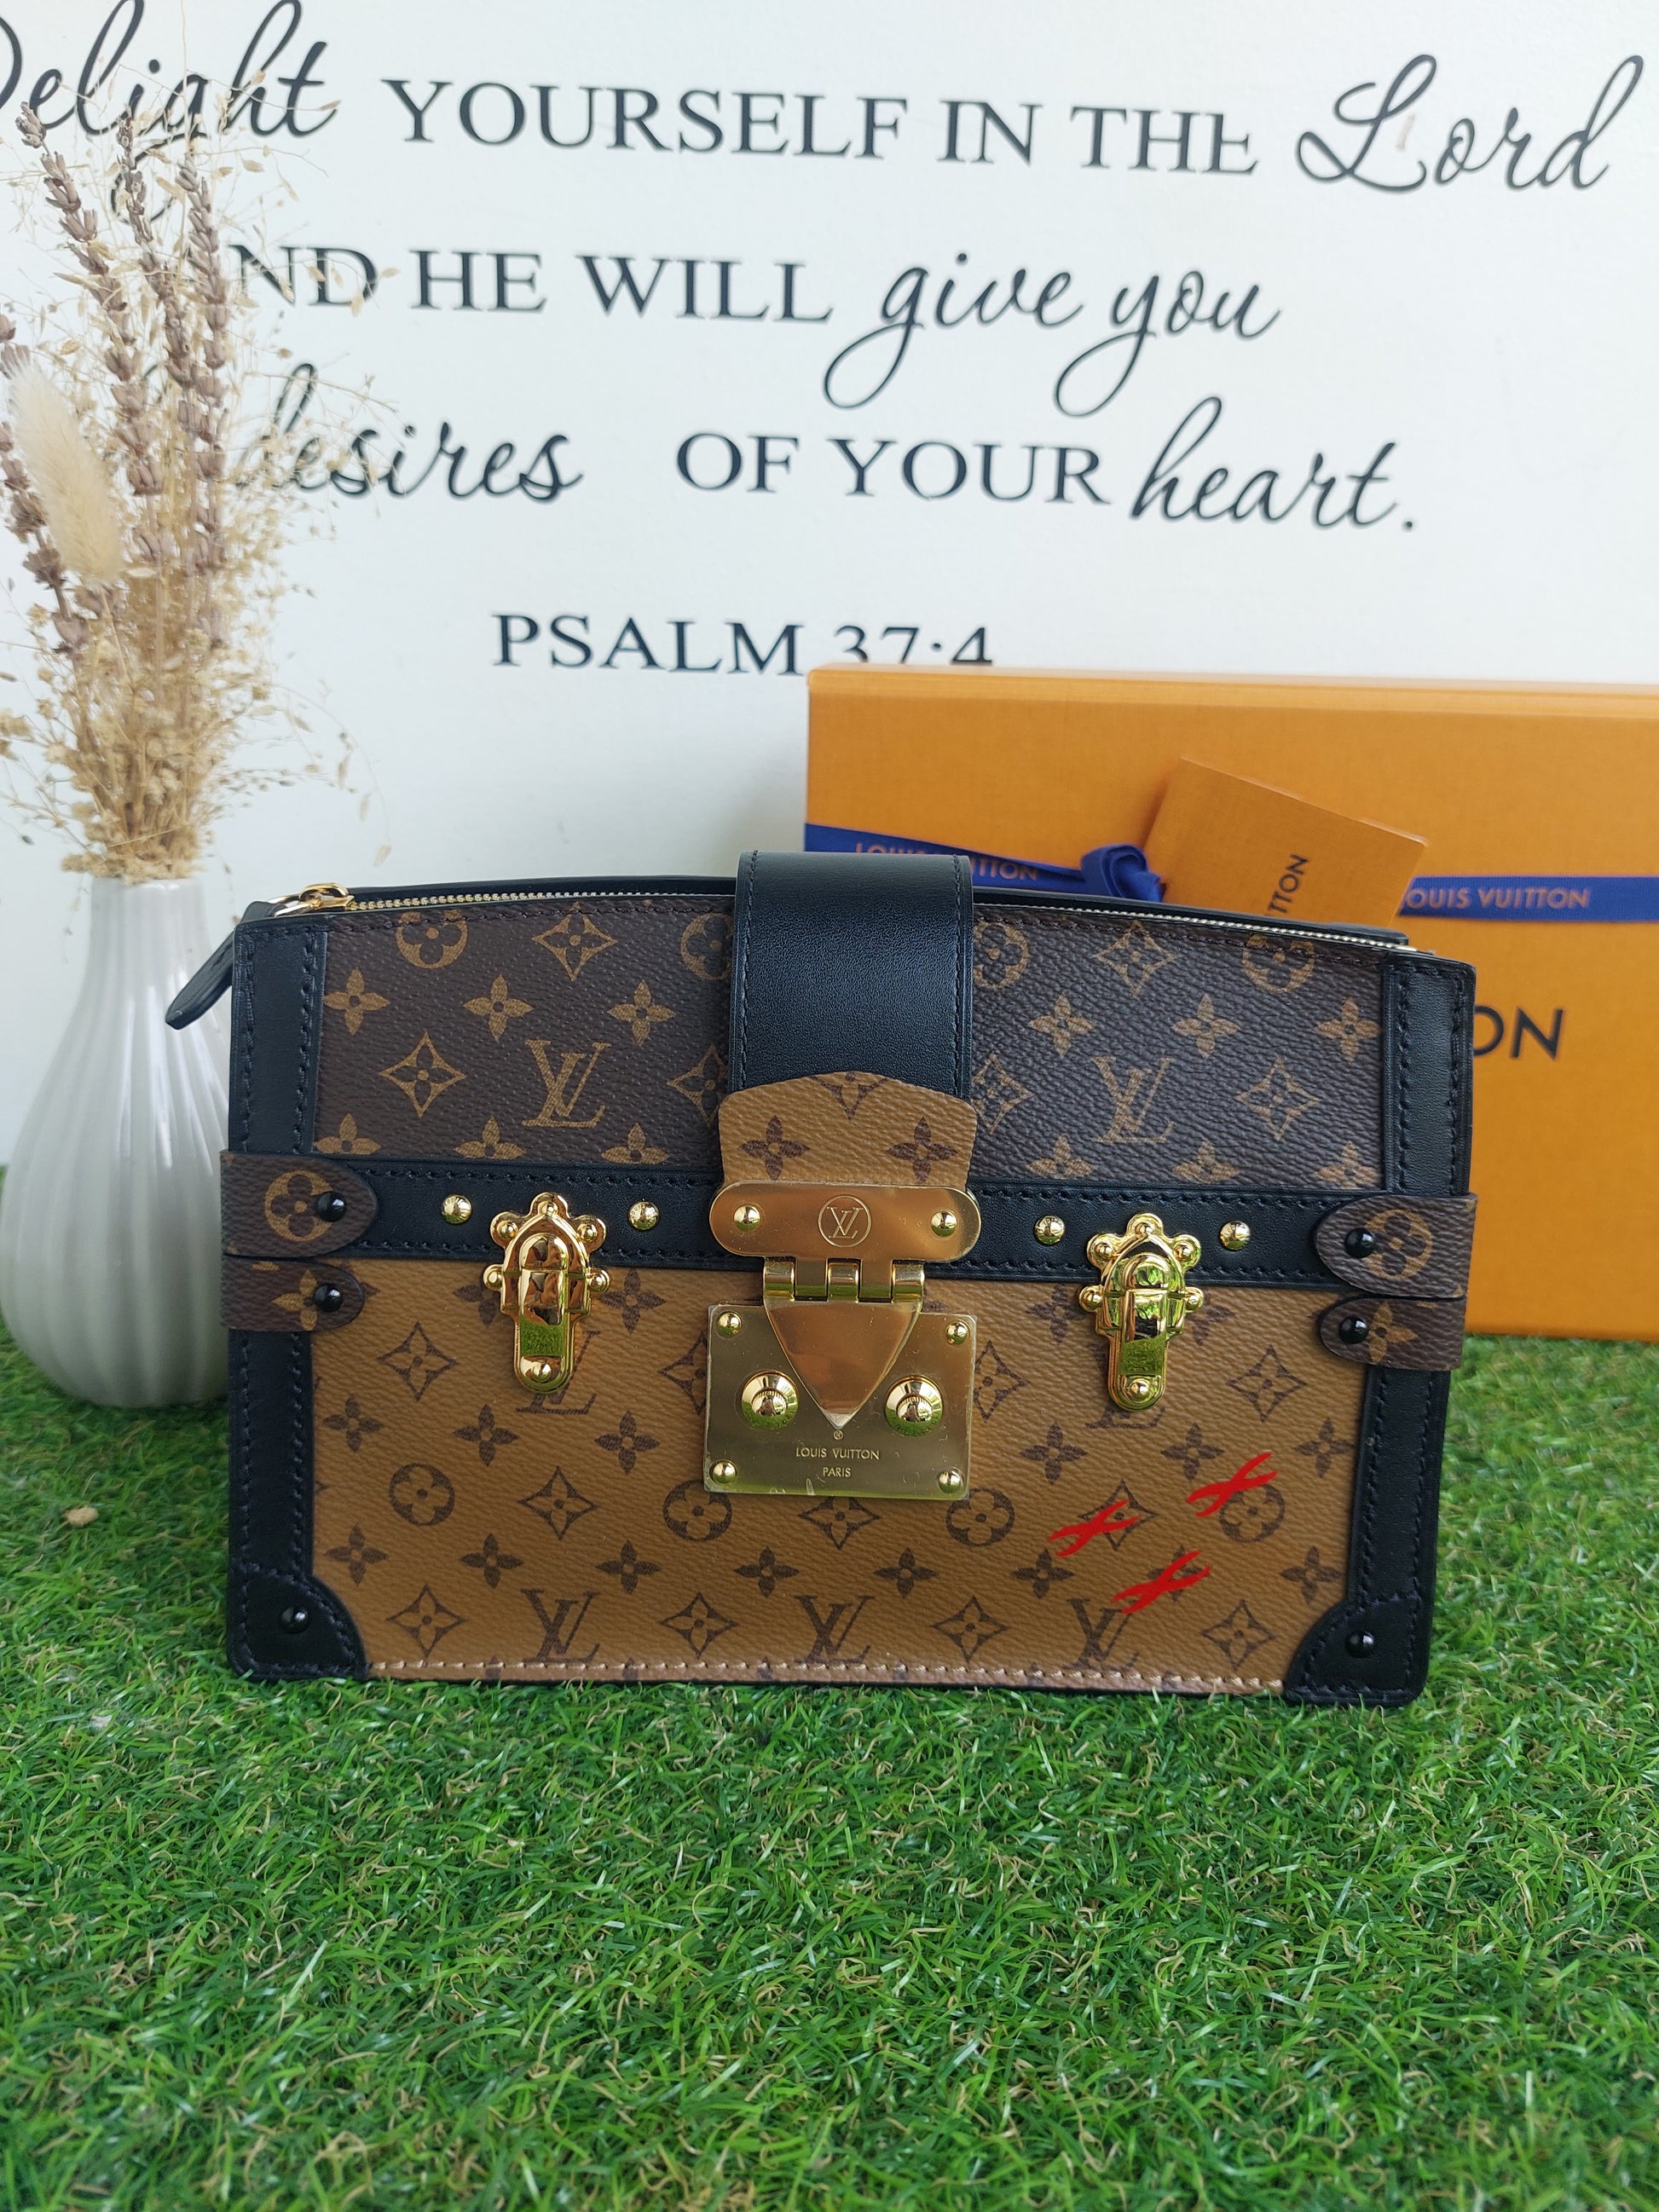 LV Trunk clutch MNG😍 - Evelyn's Collection